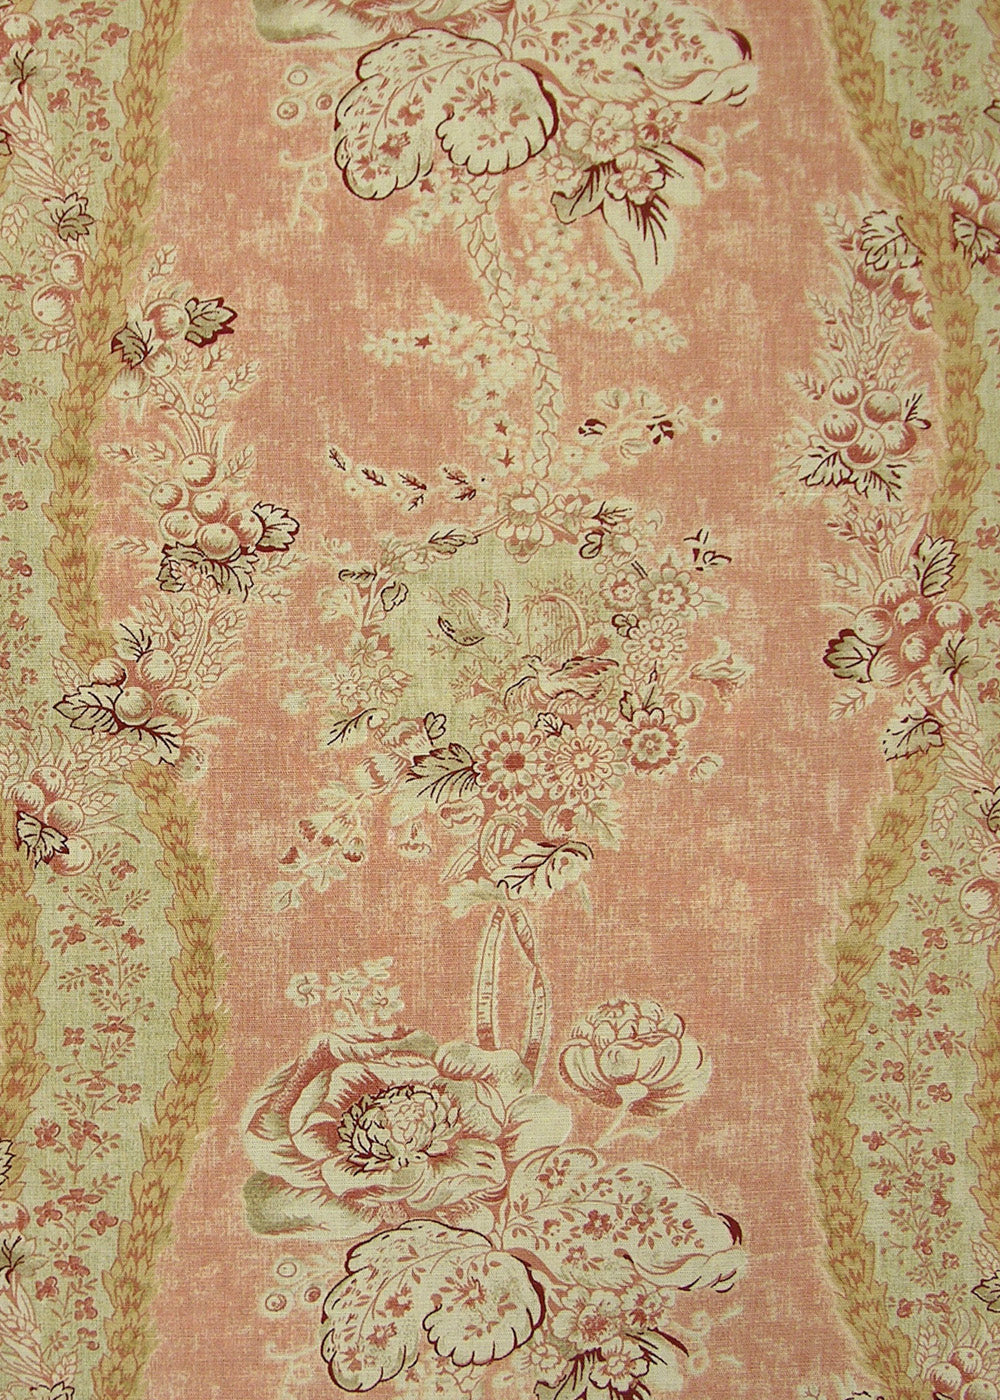 pink fabric with a monochromatic pattern of florals, vines, and berries